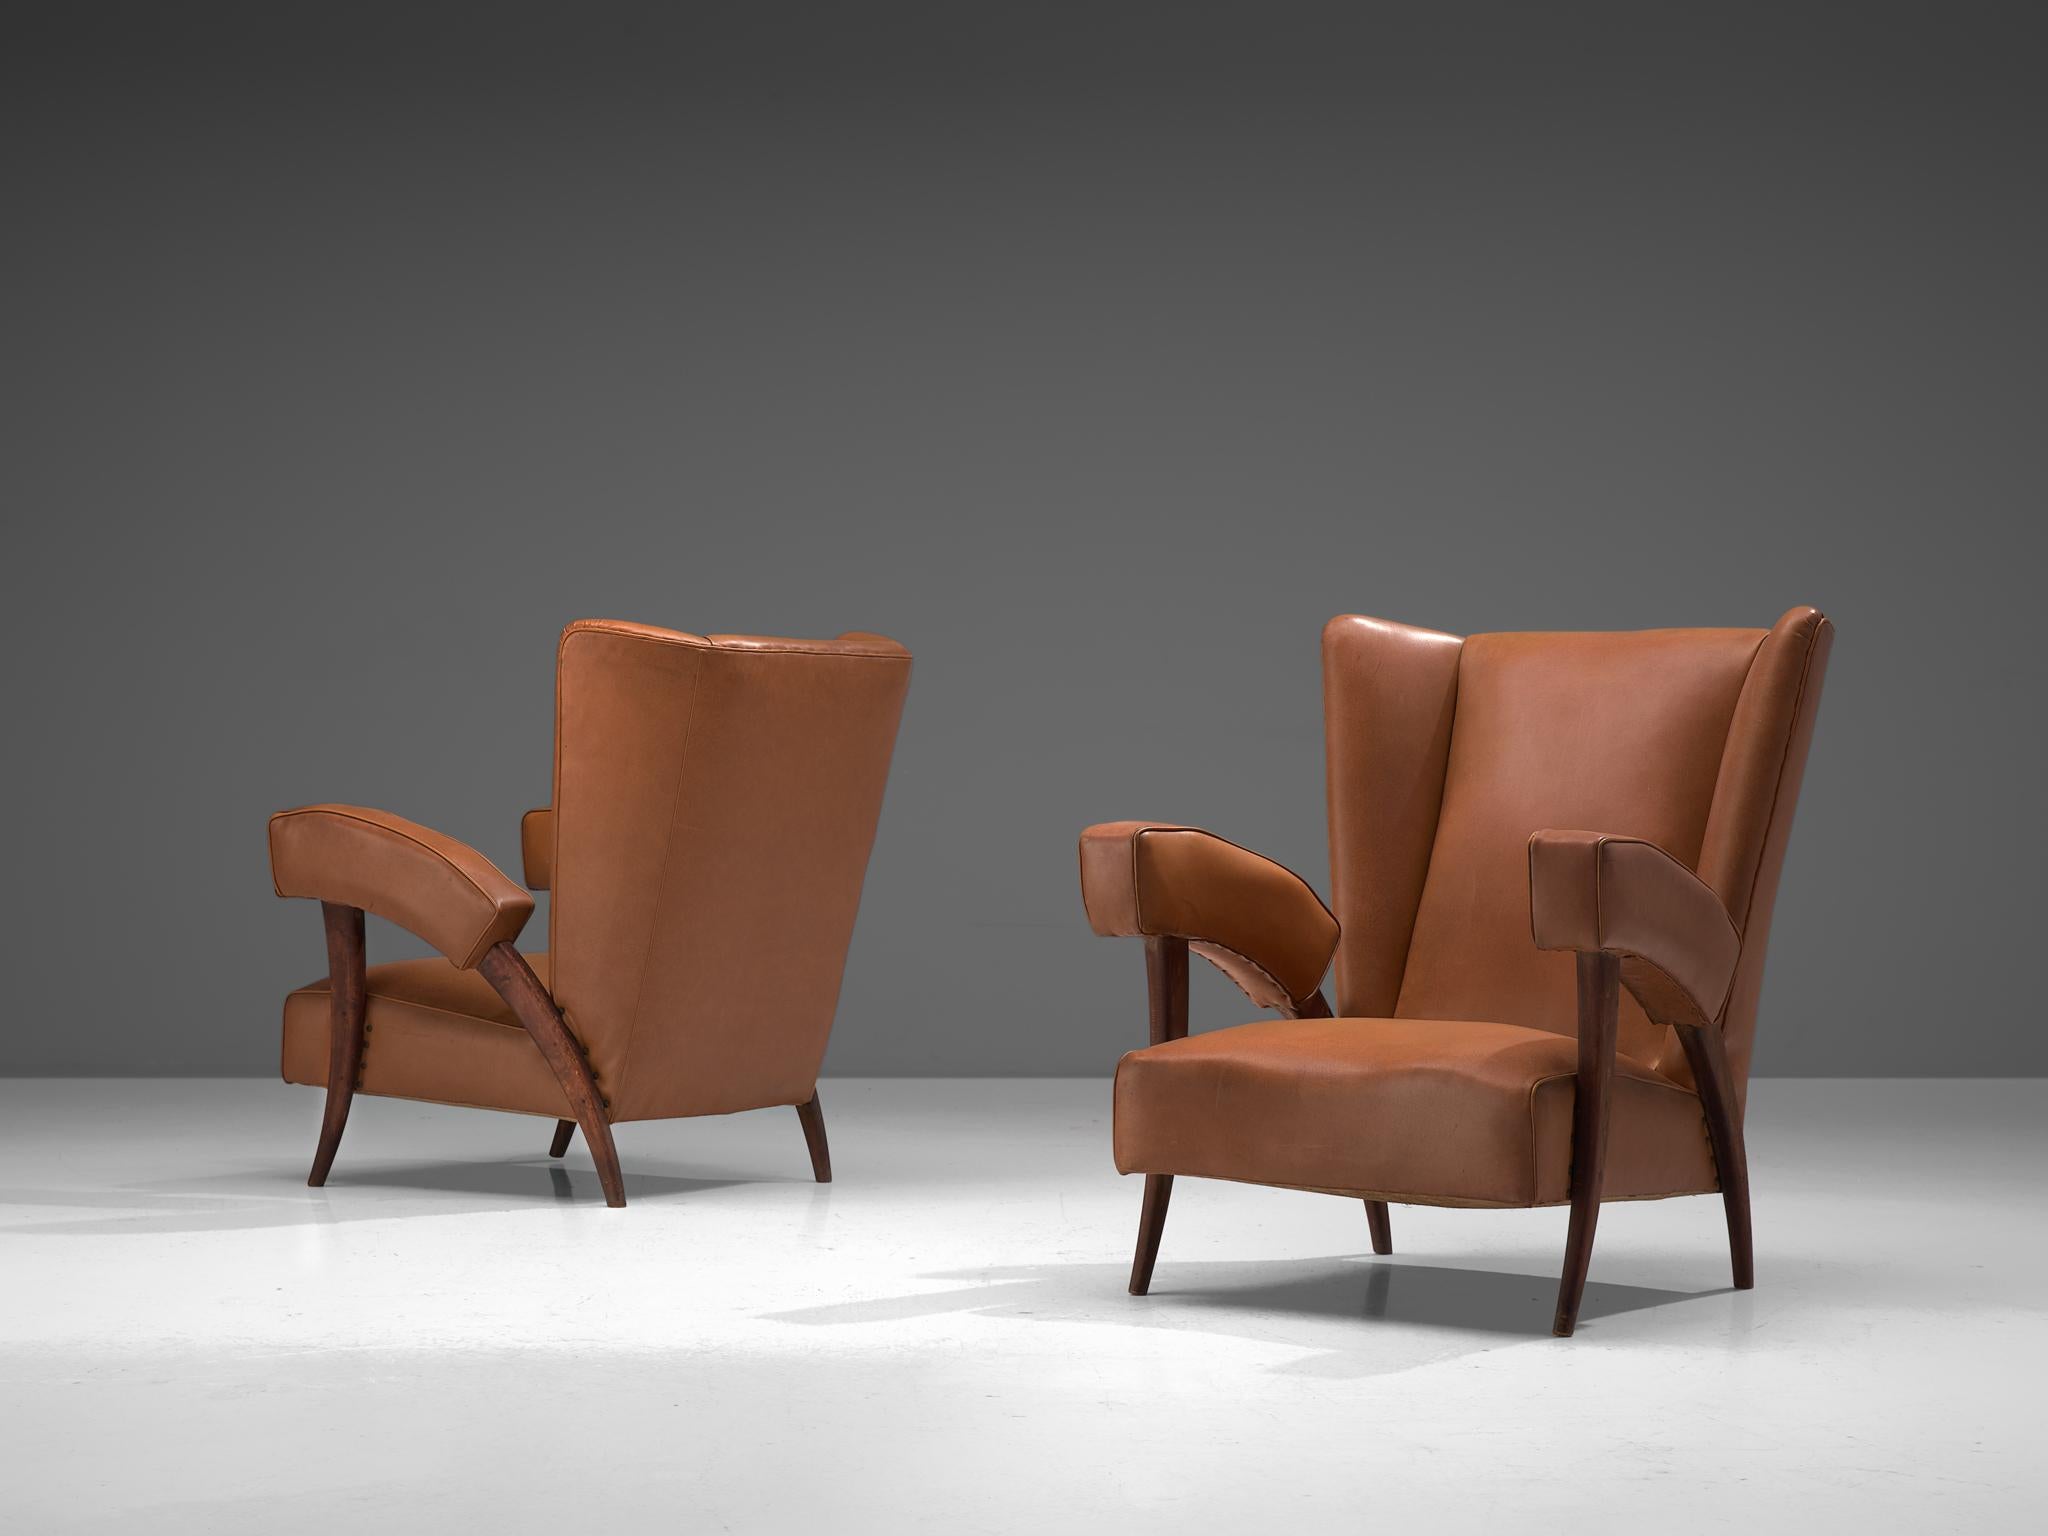 Set of 2 high back chairs to be reupholstered, fabric and darkened oak, Italy, 1950s.

Stunning set of Italian lounge chairs featuring high wingbacks. The chairs are comfortable in their design, featuring a wide seat and a tilted backrest. The